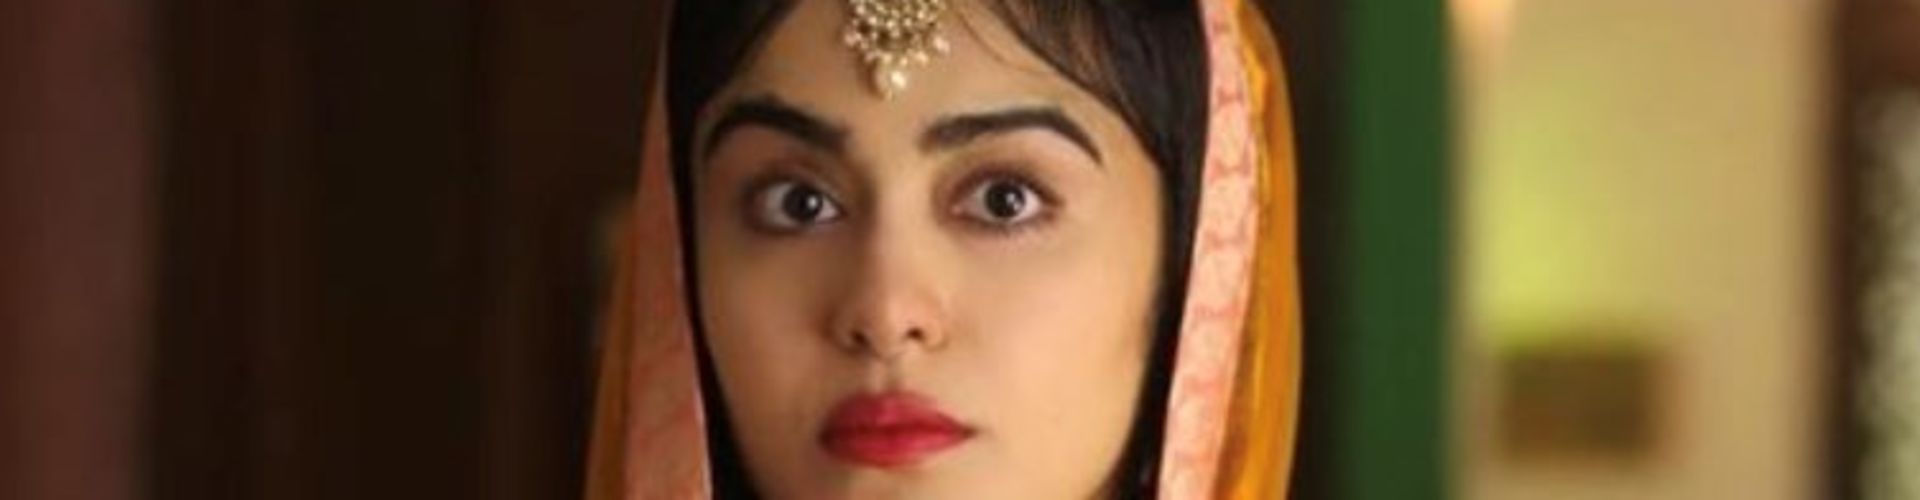 Adah Sharma Urge People To Appreciate The Real Religion Conversion Victims